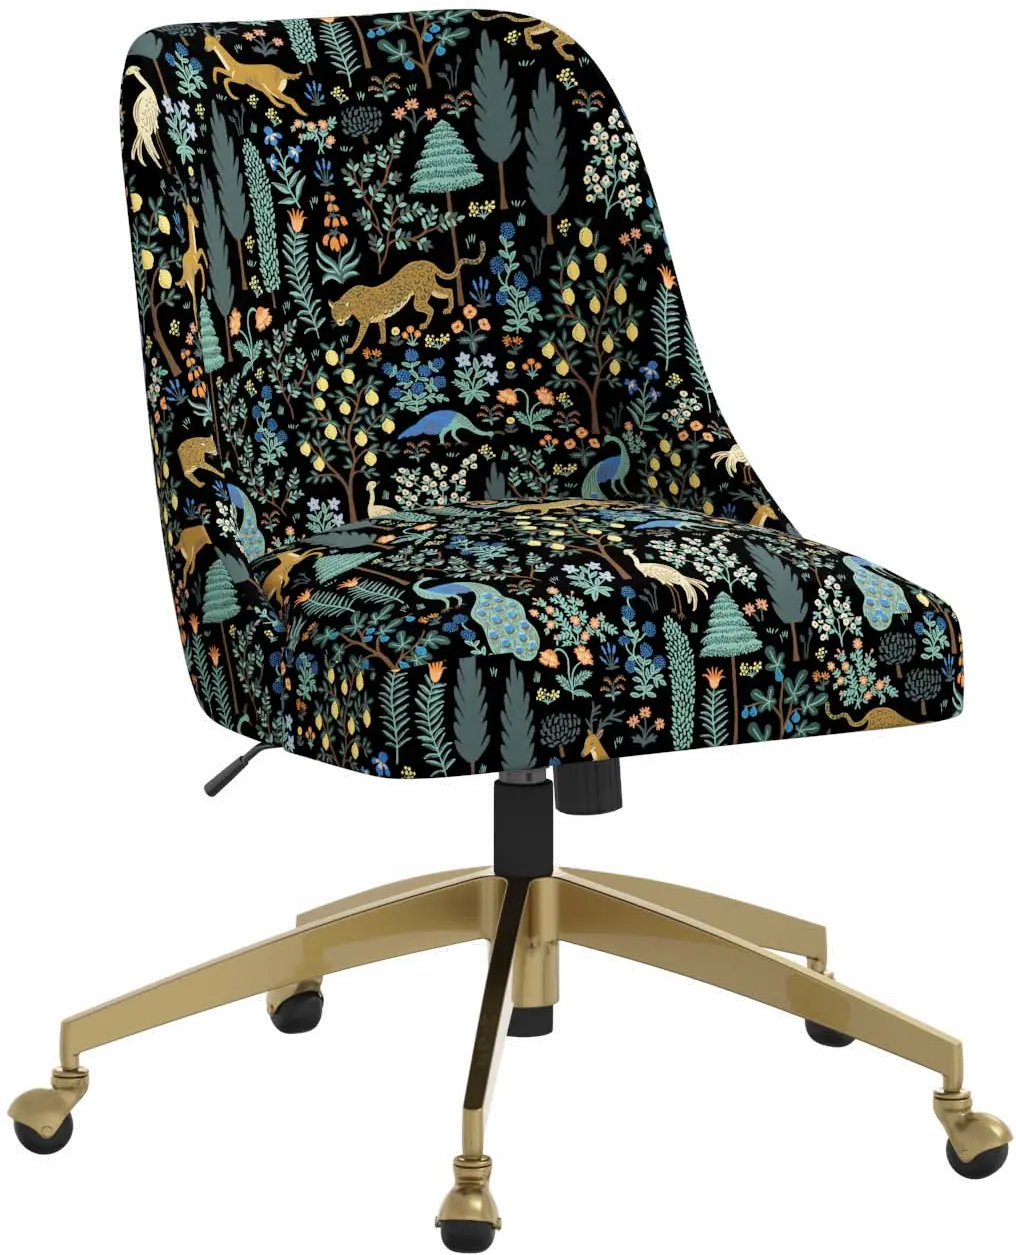 Rifle Paper Co. Oxford Menagerie Black Office Chair